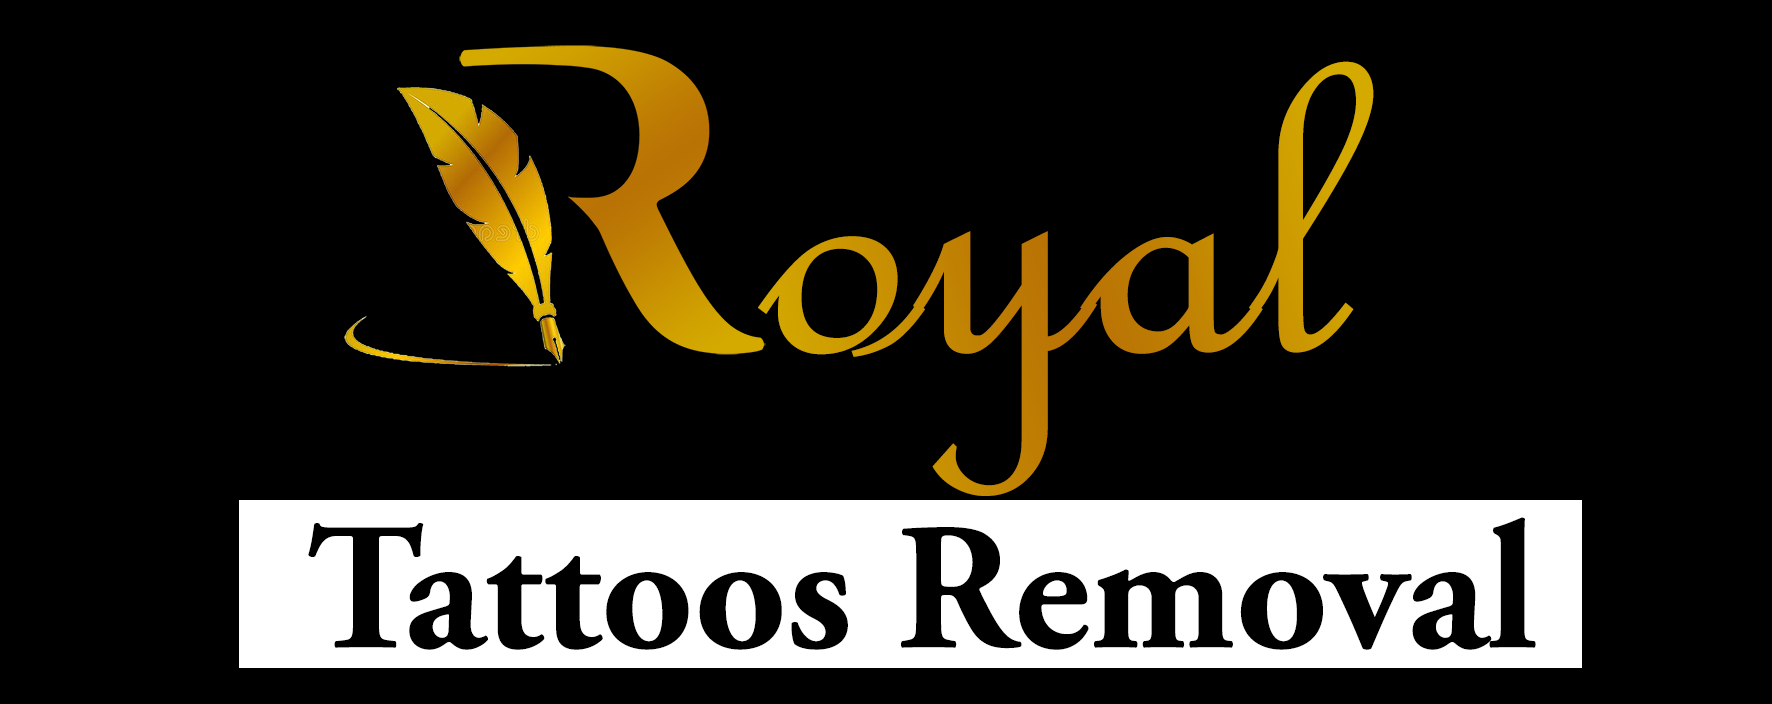 Tattoo Removal in chennai | Laser Tattoo Removal in chennai